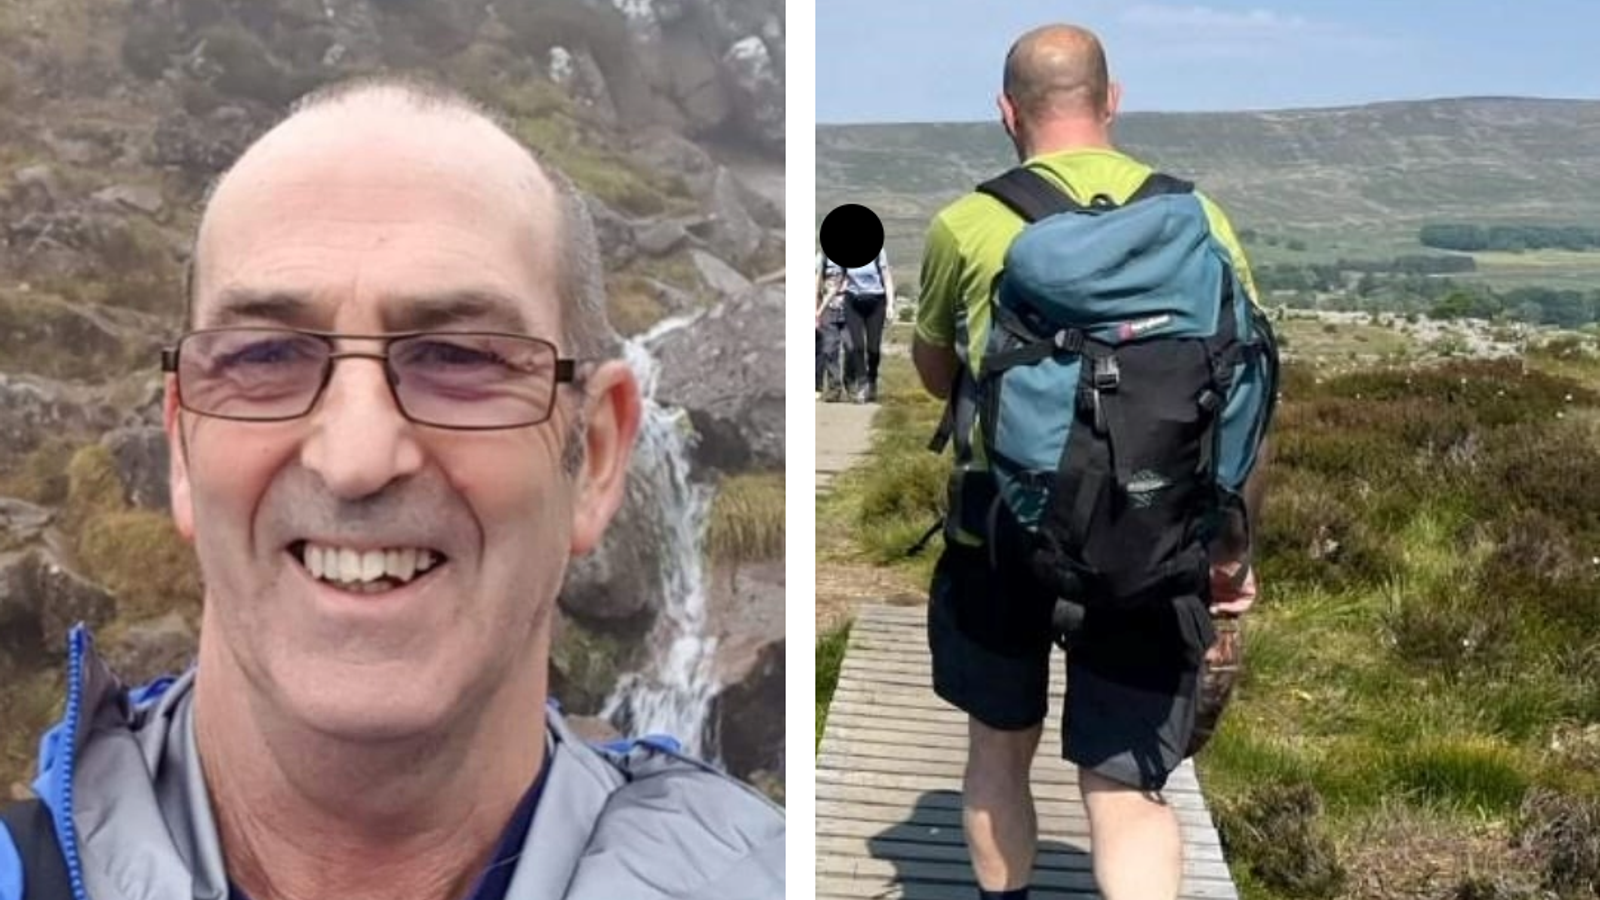 North Wales Police issue fresh appeal to find hiker missing for almost a month